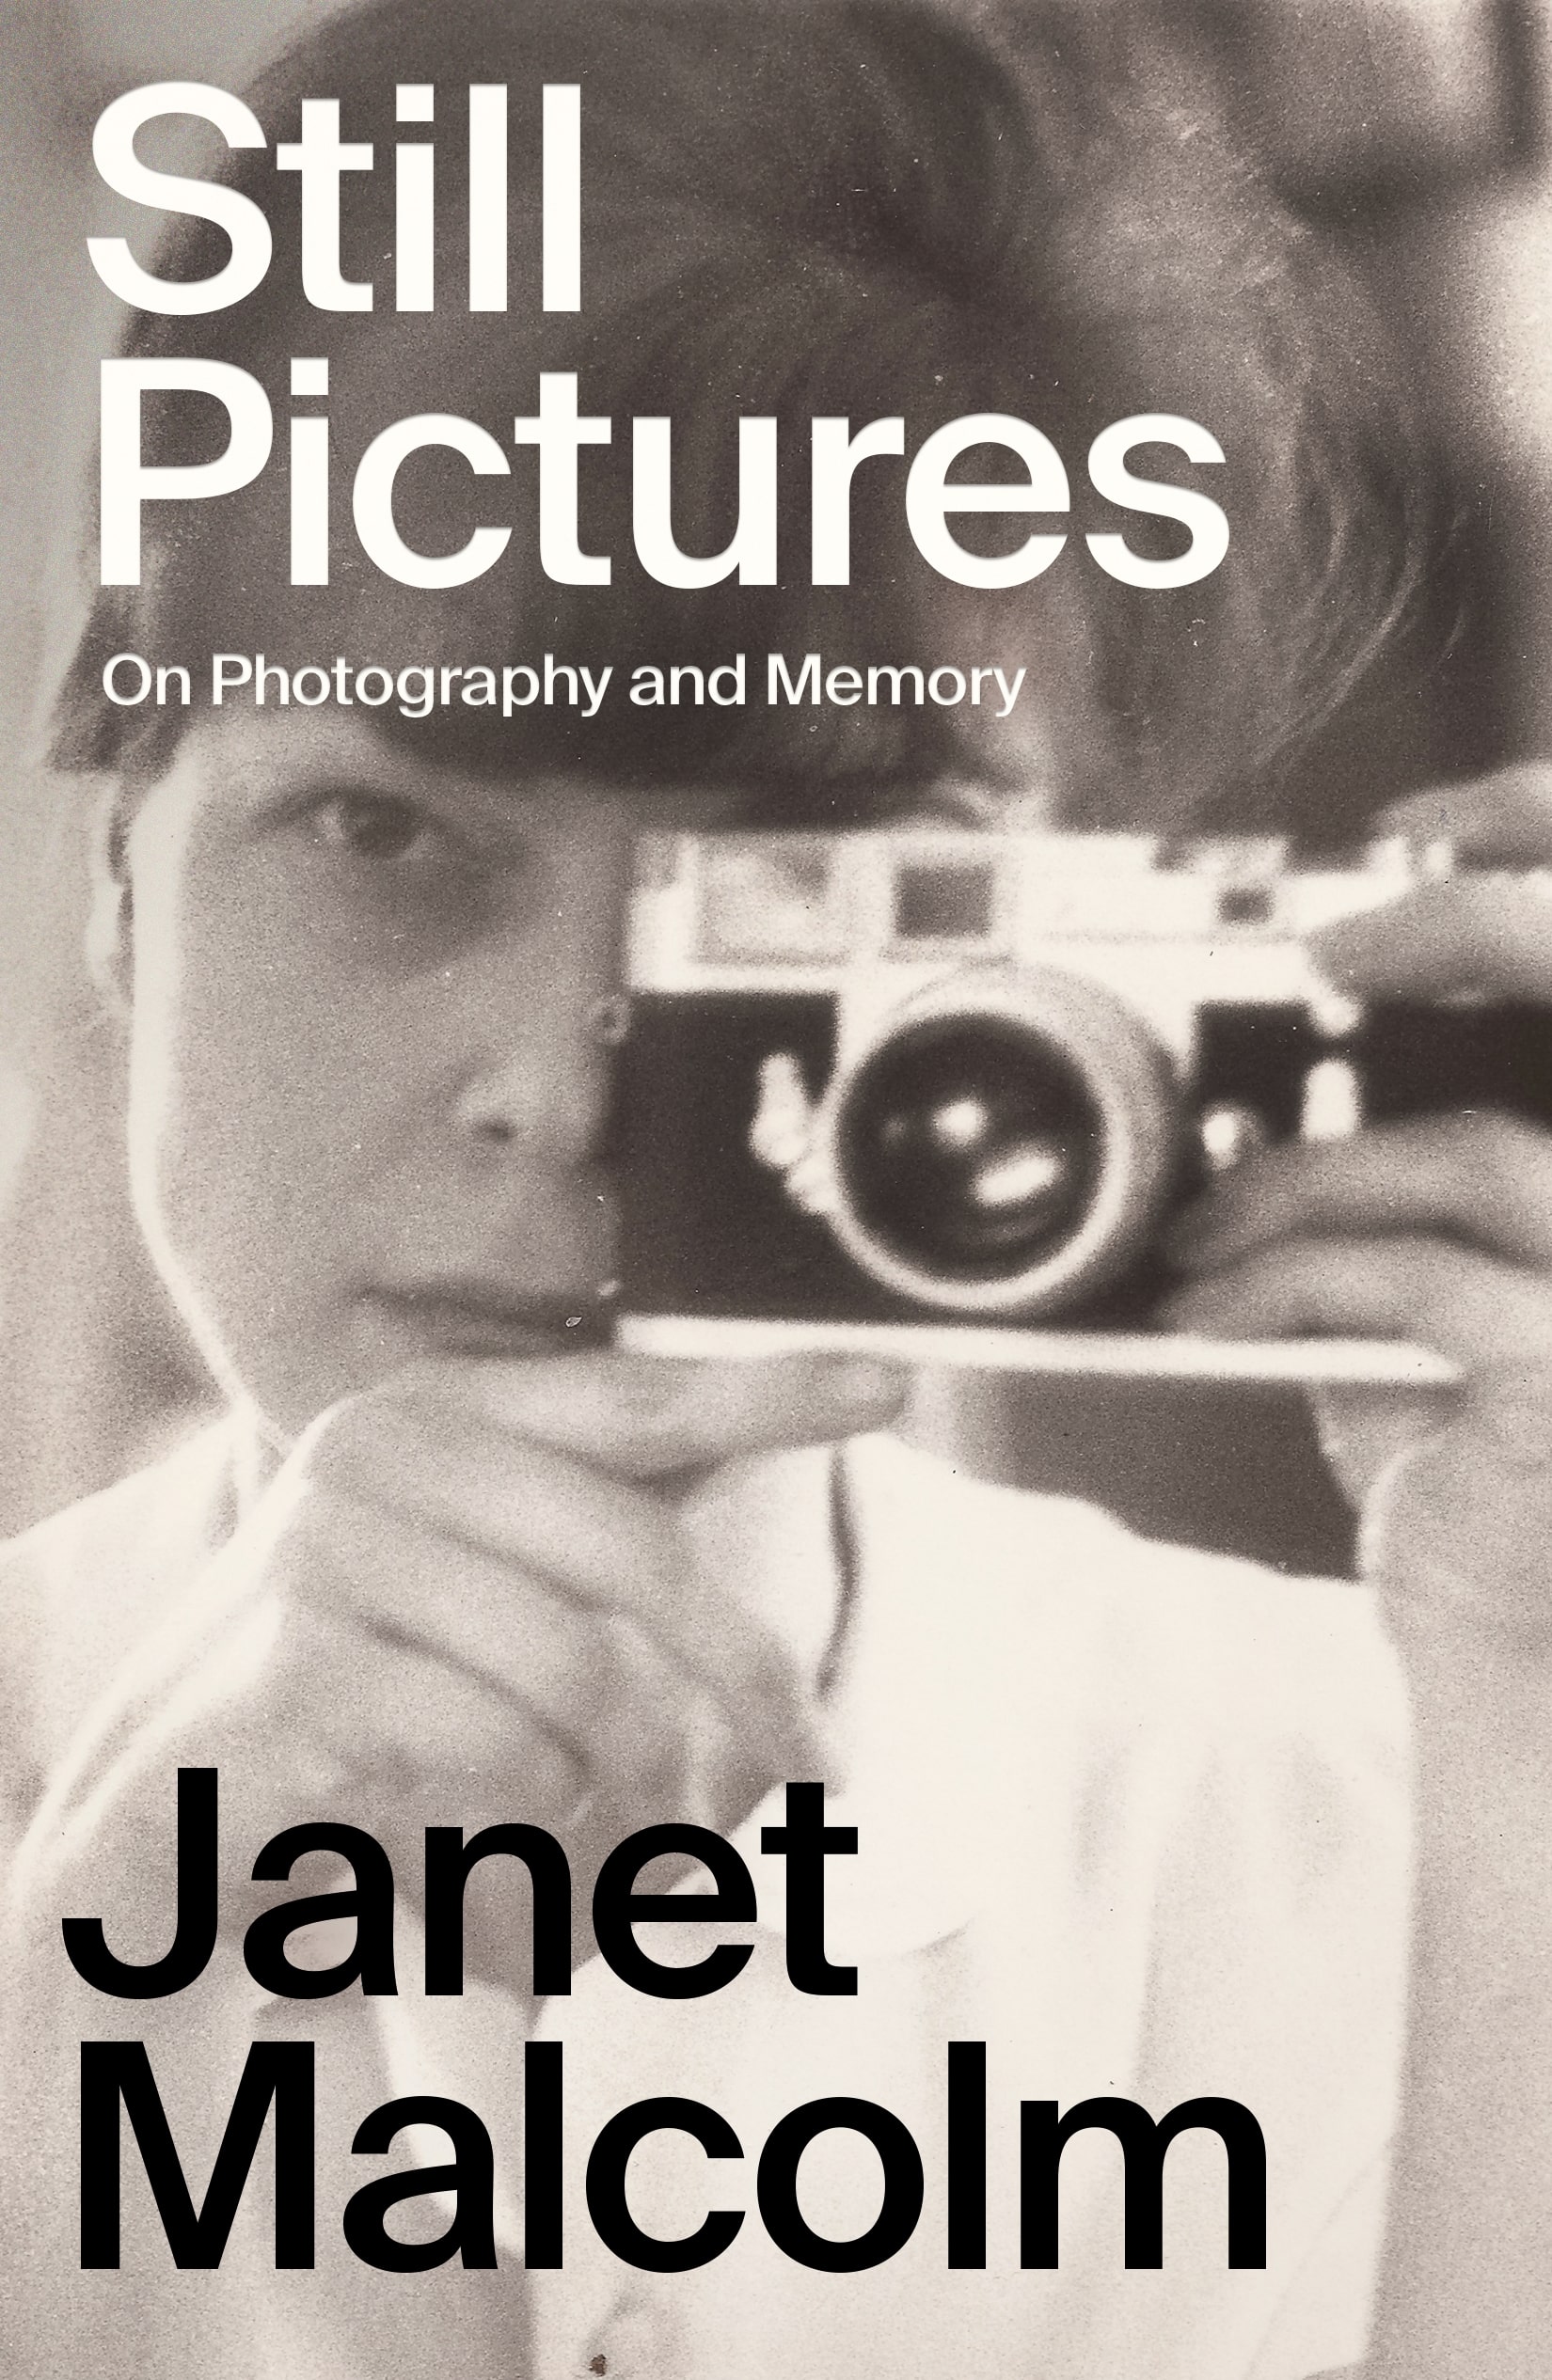 Janet Malcolm: Still Pictures